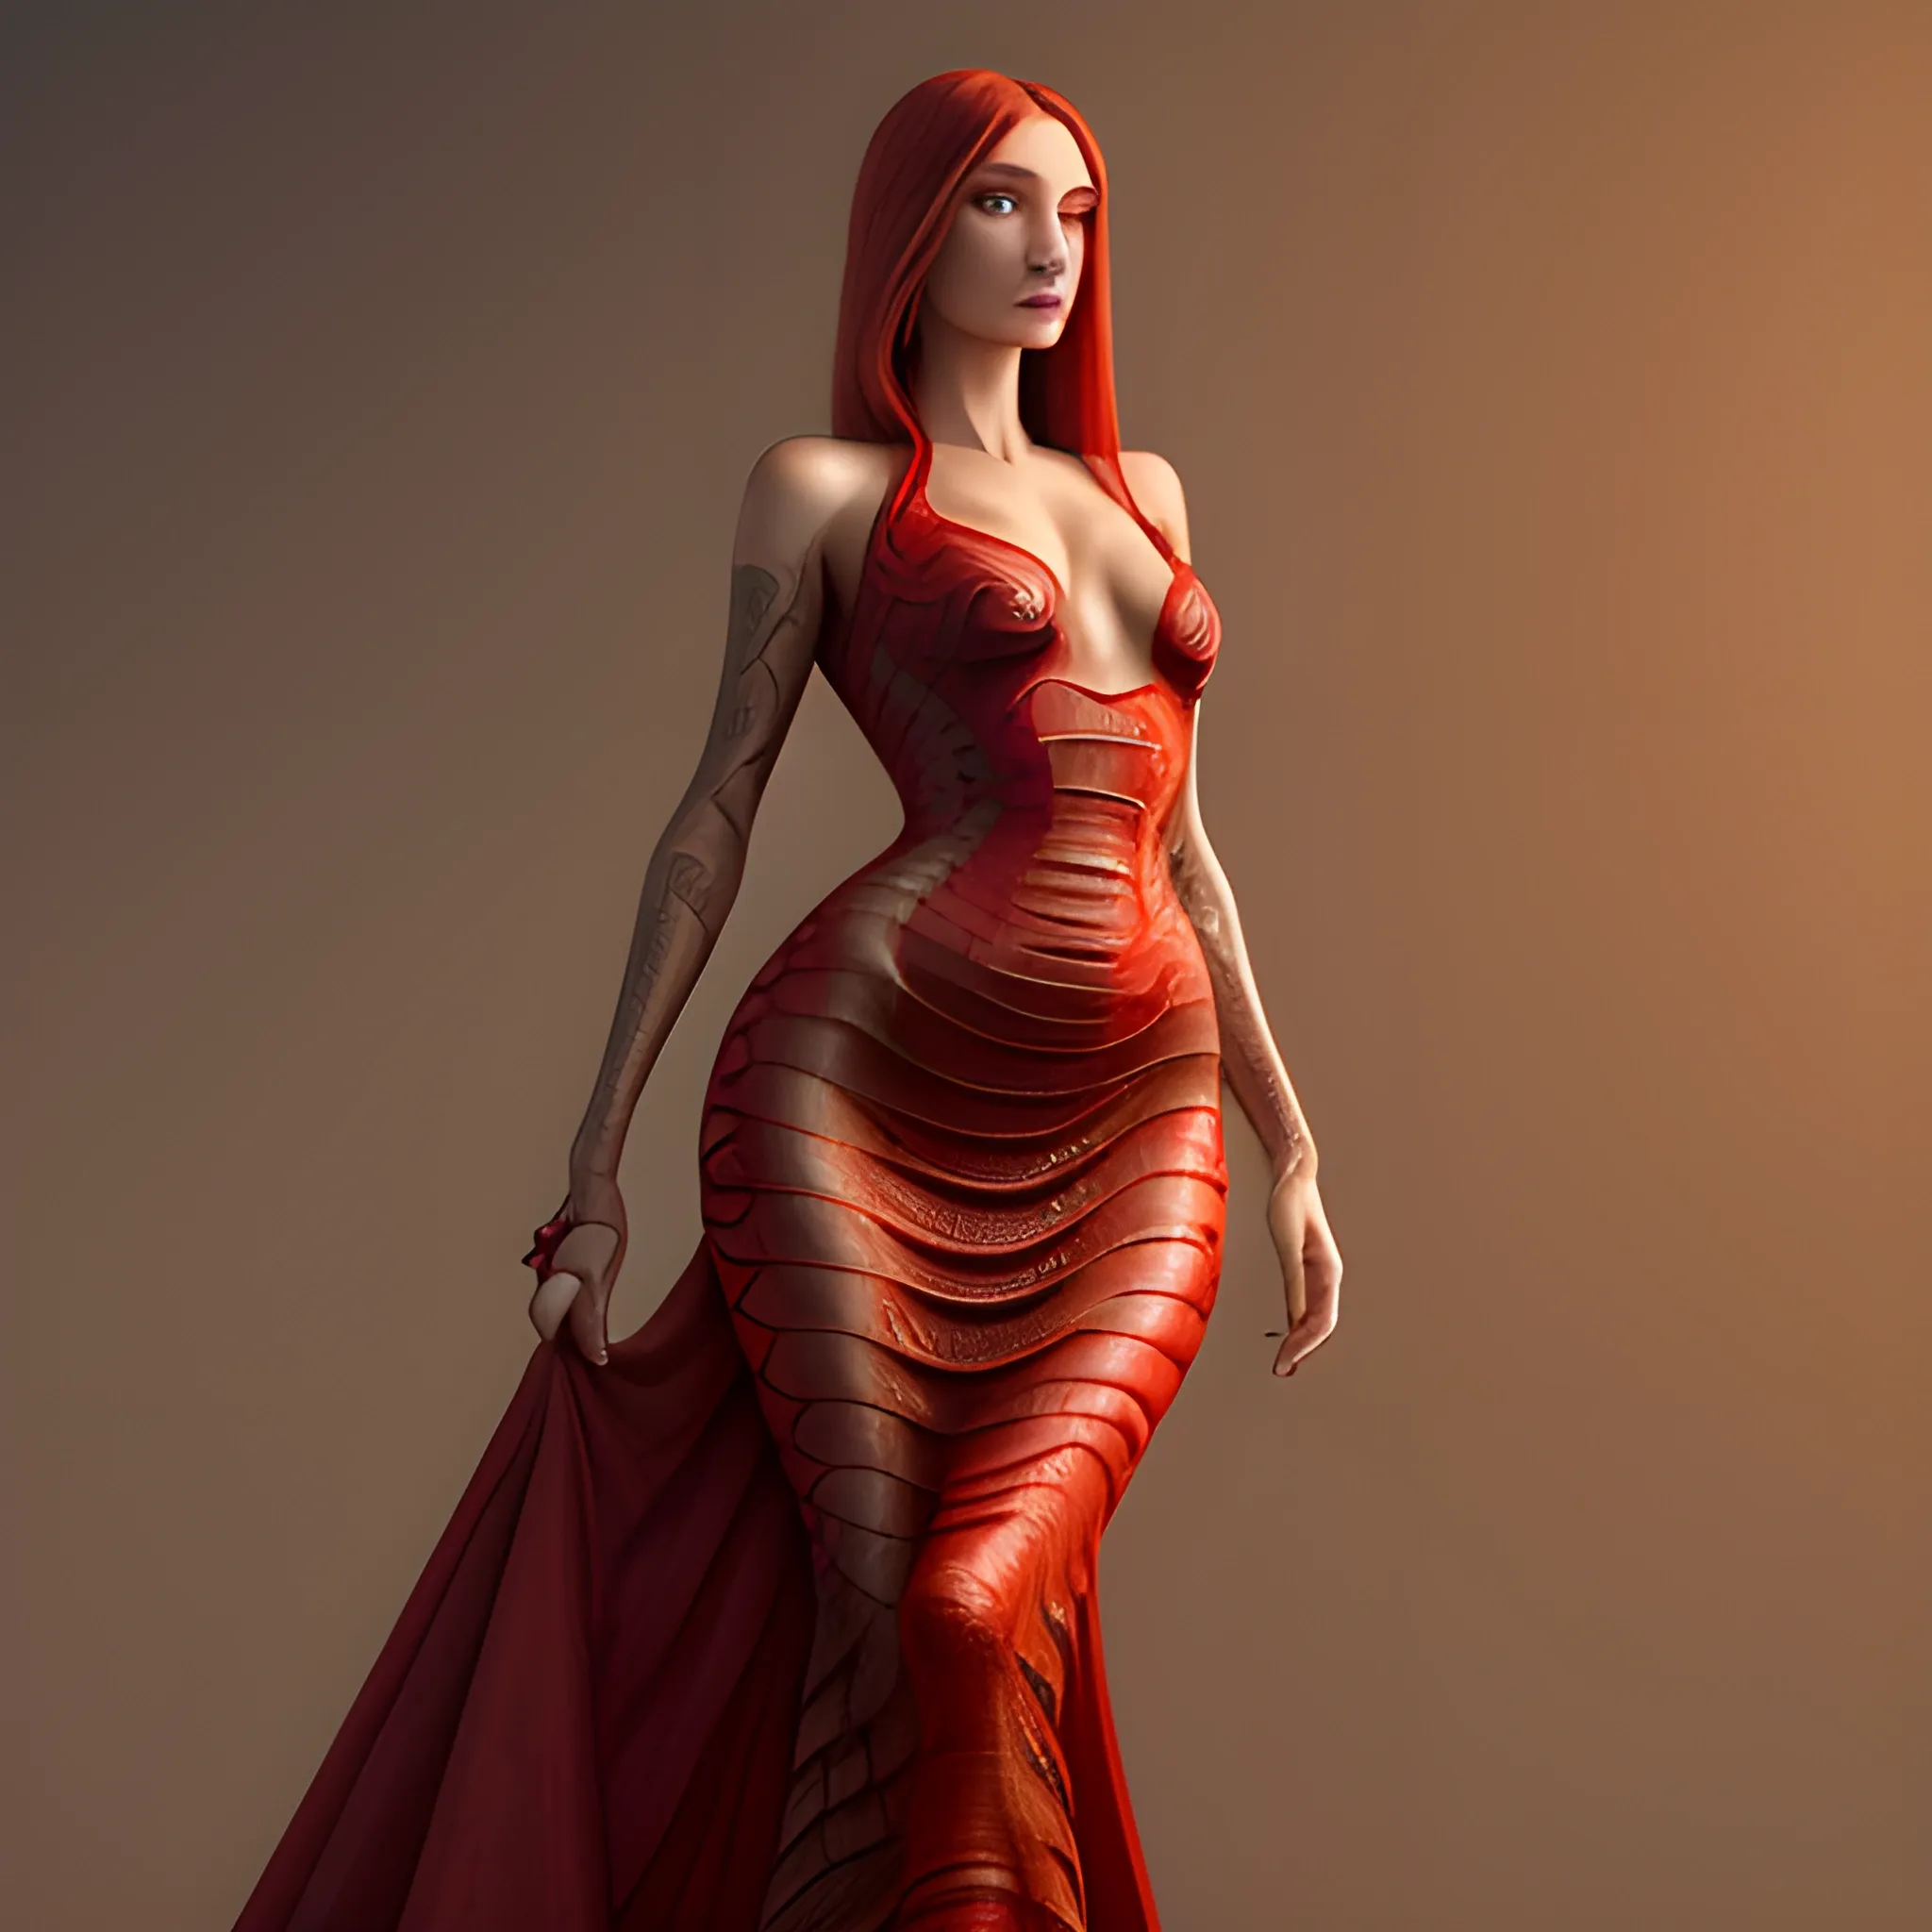 cailin, Half snake half human, red dress, fantasy art,
realistic, 4k, high resolution, full body view,
high detail, detailed, highly realistic, 4k, sharp focus